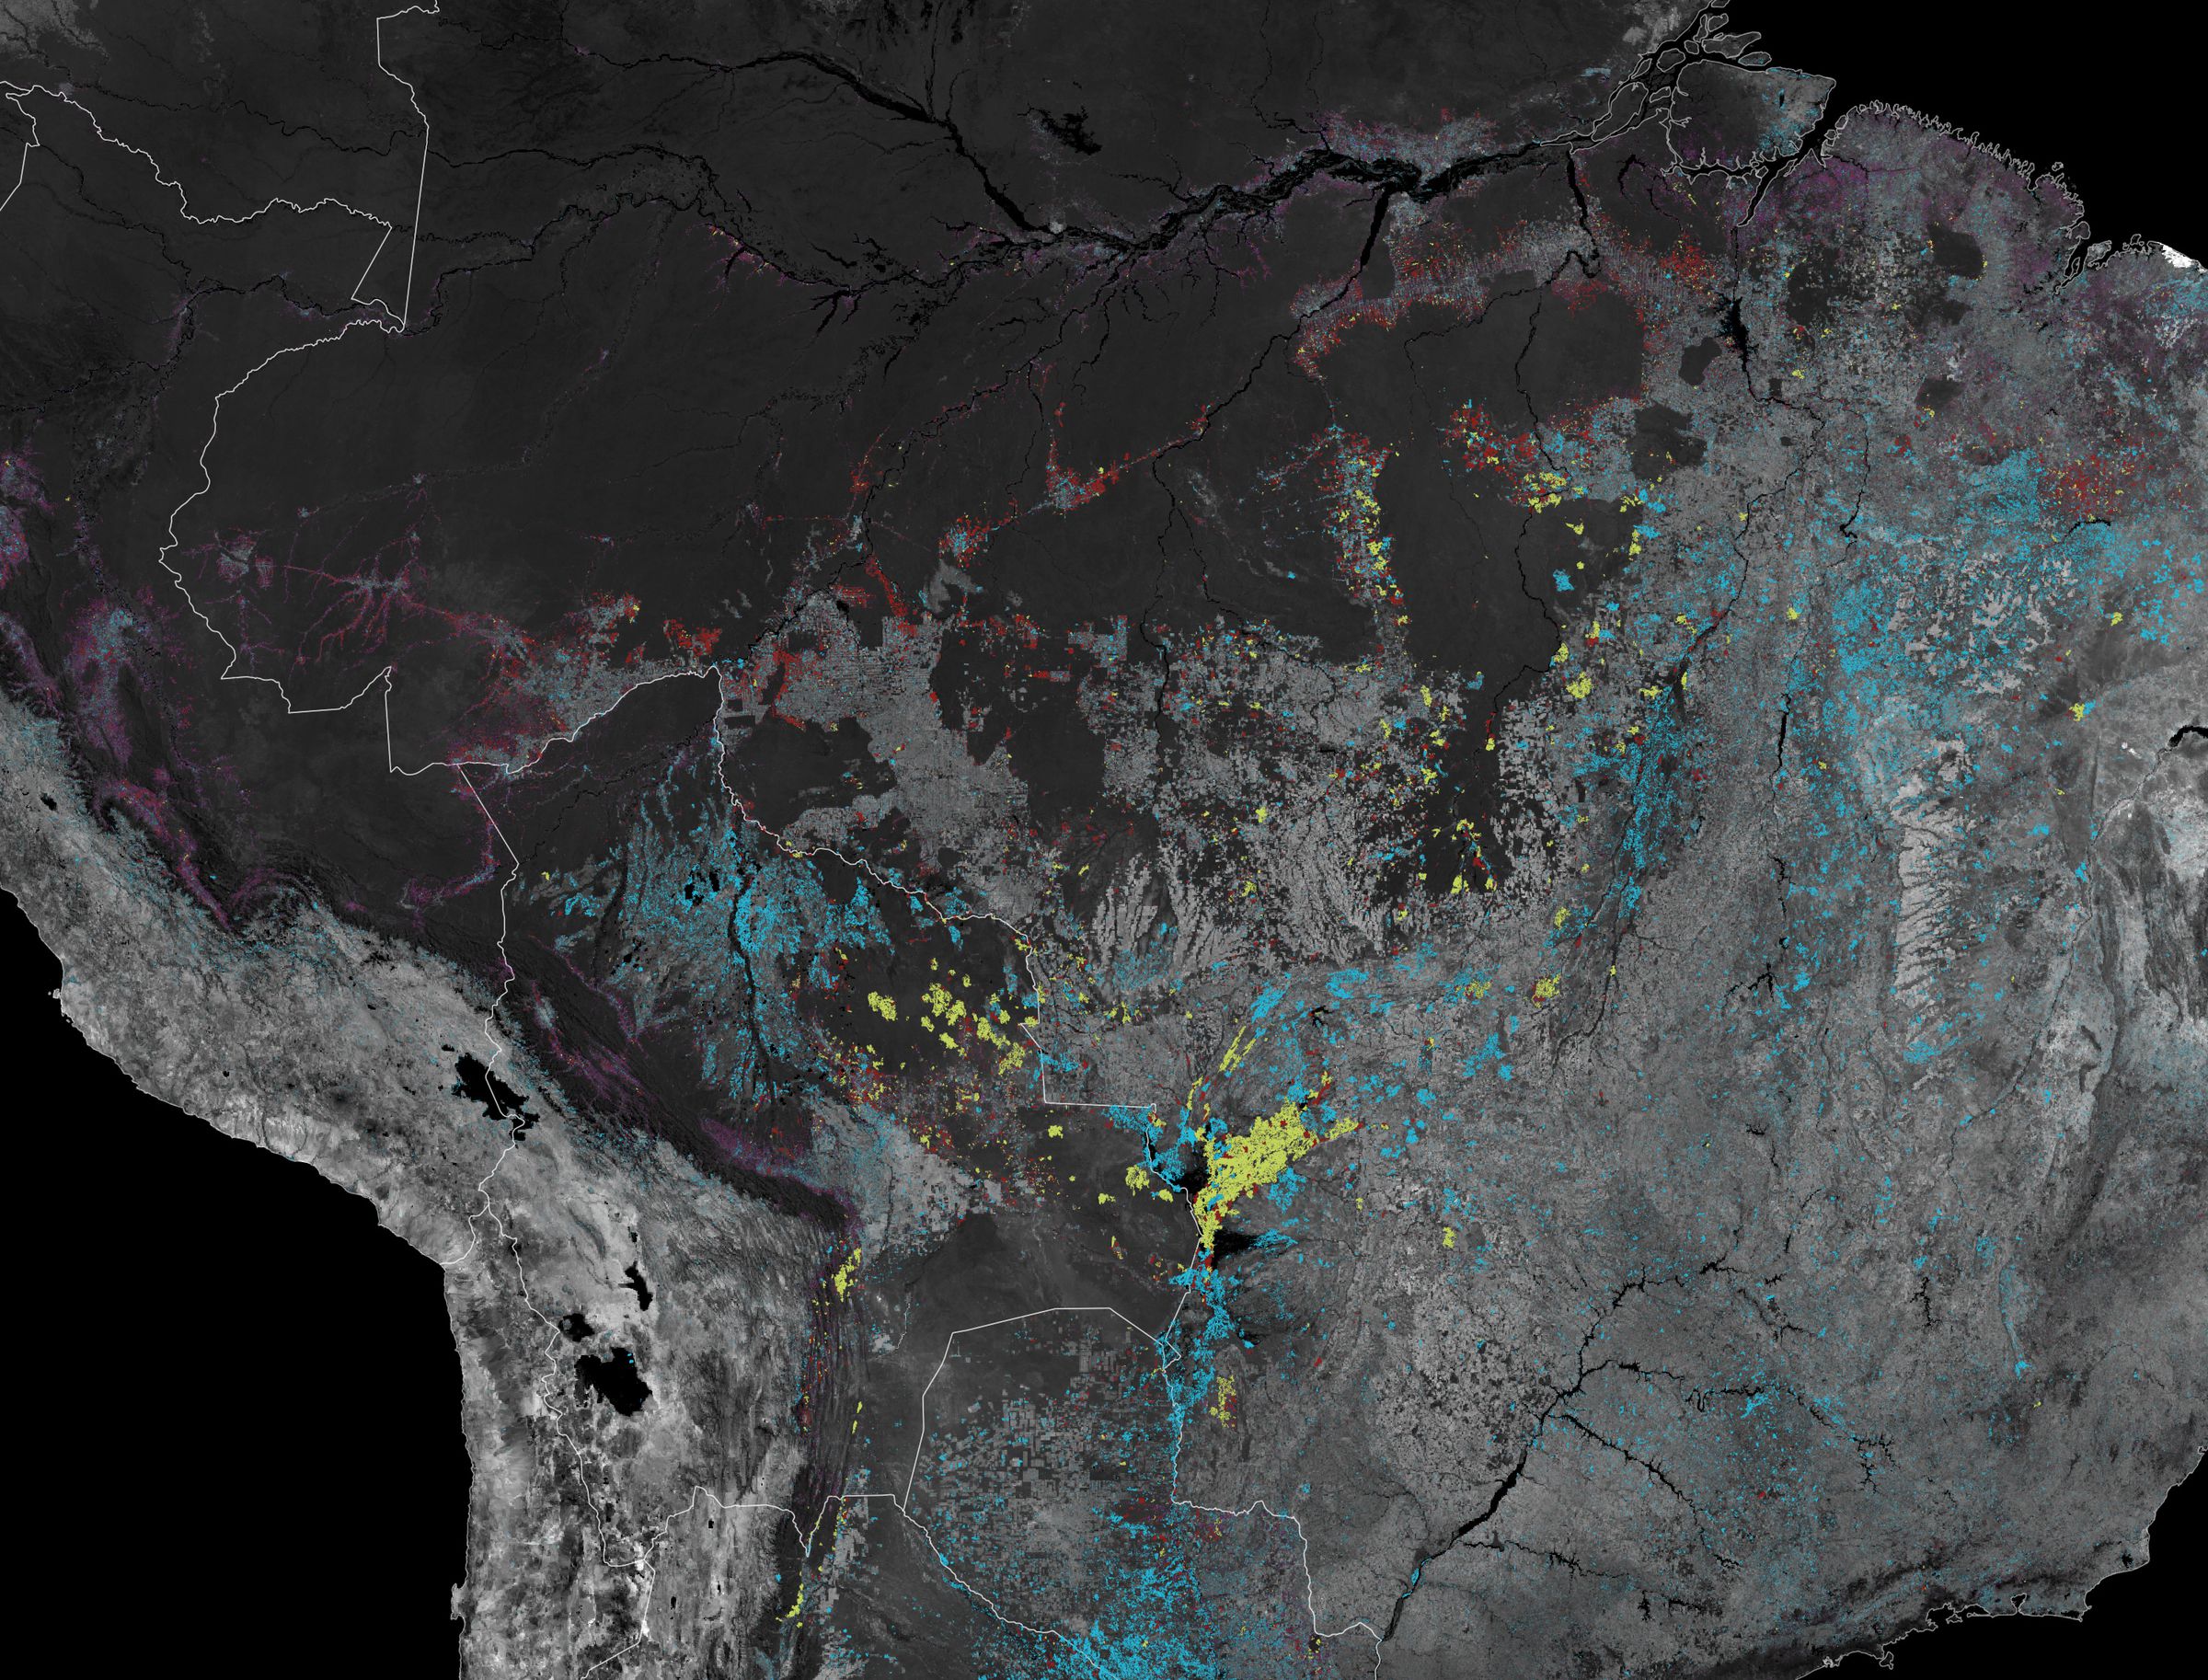 NASA grouped fires into four different types marked on this map: fires caused by deforestation to make way for industry (red), uncontrolled fires that burn the understory of the forest (green), fires burning in savanna-grasslands (blue), and small fires set by subsistence farmers to clear land (purple). NASA looks at the duration, intensity, and movement of fire “hotspots” to identify what kind of fire is burning.